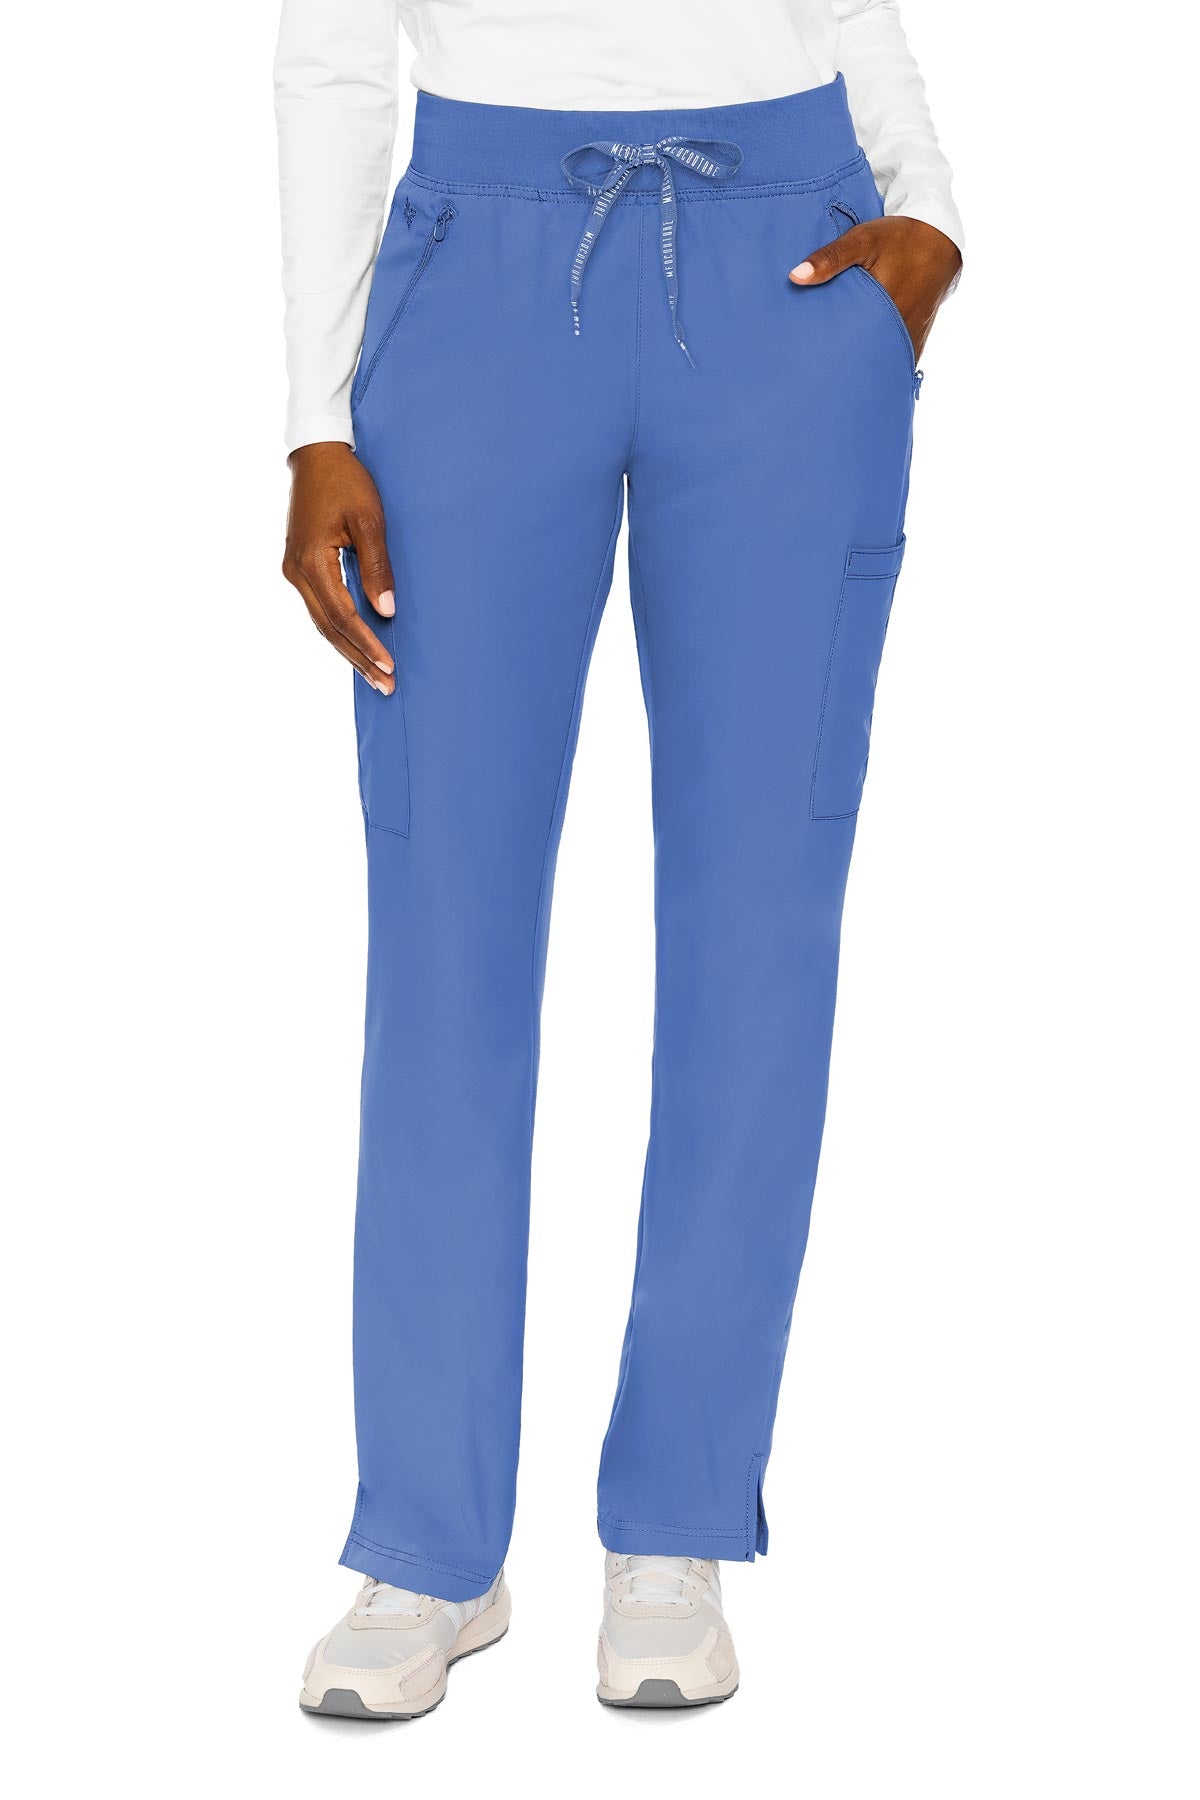 Med Couture Ceil PANT